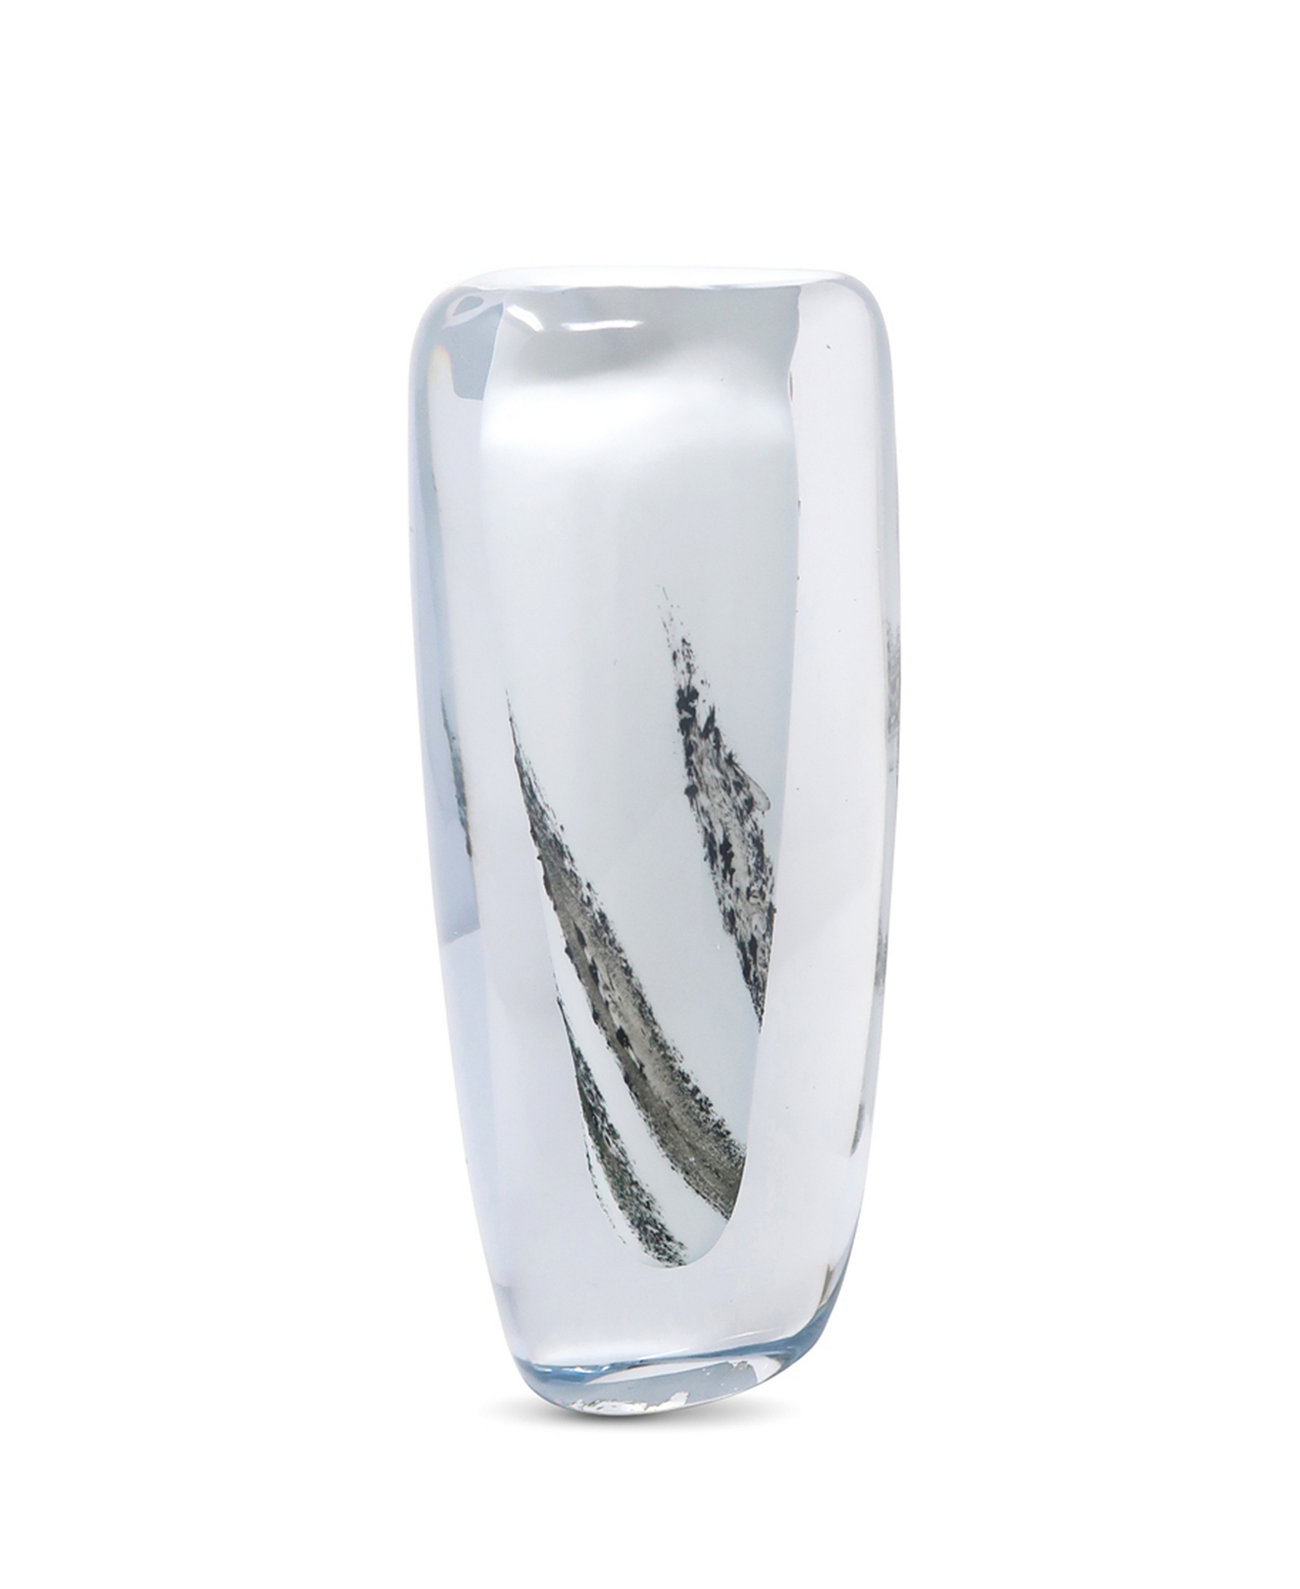 11.5"H White Inner with Black Strokes Double Wall Glass Vase Vivience